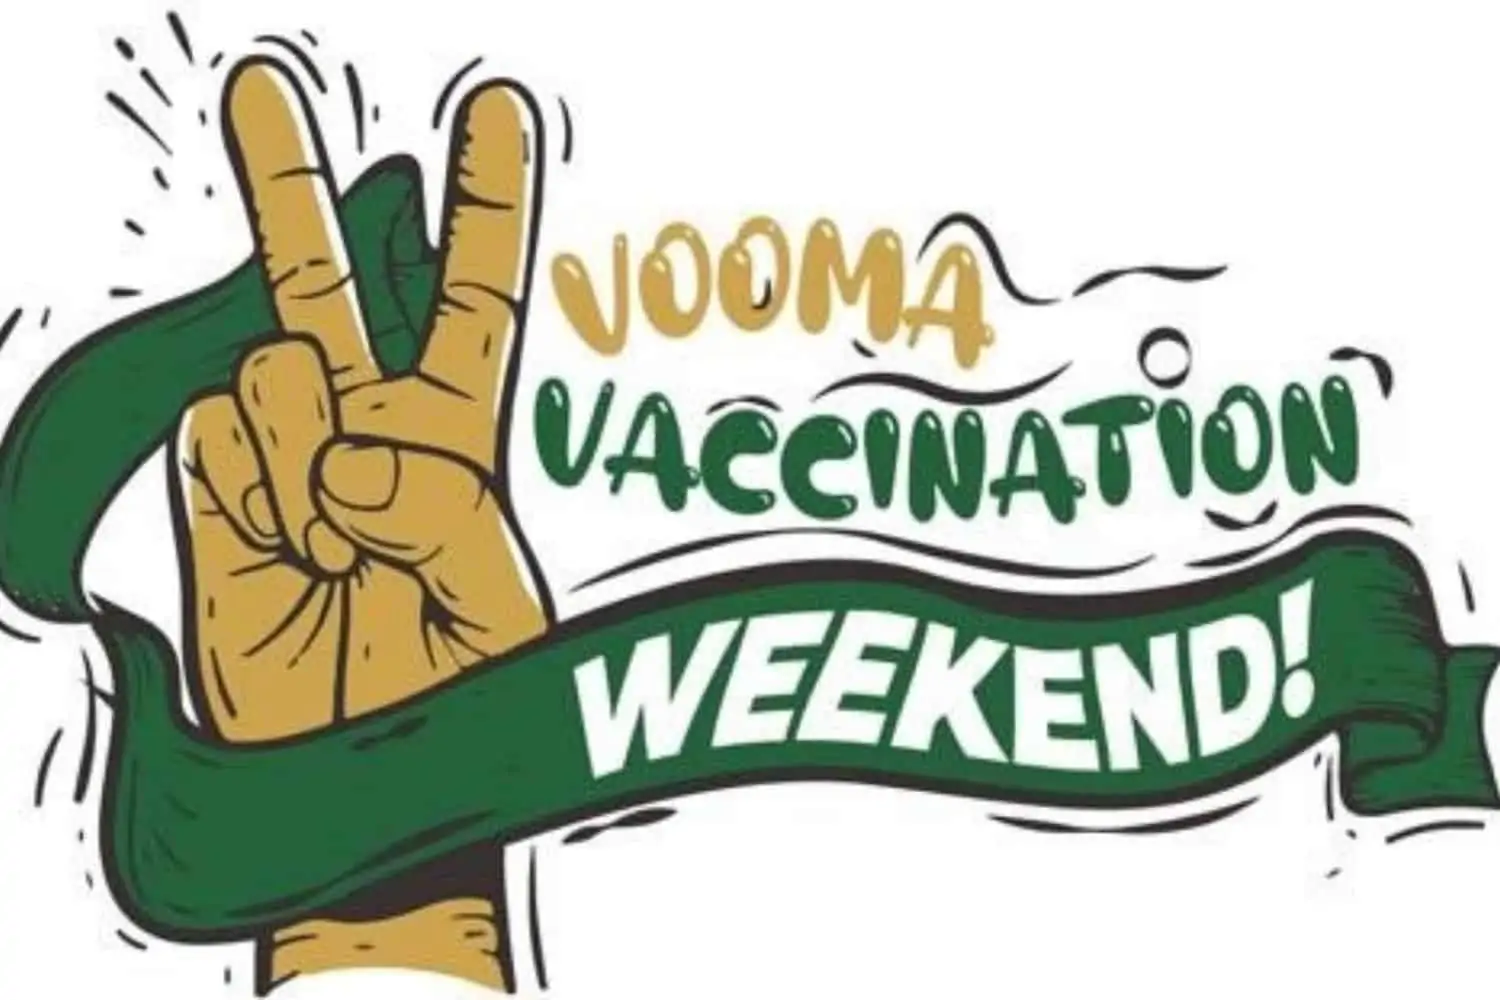 Vooma Vaccination Weekend campaign launches today